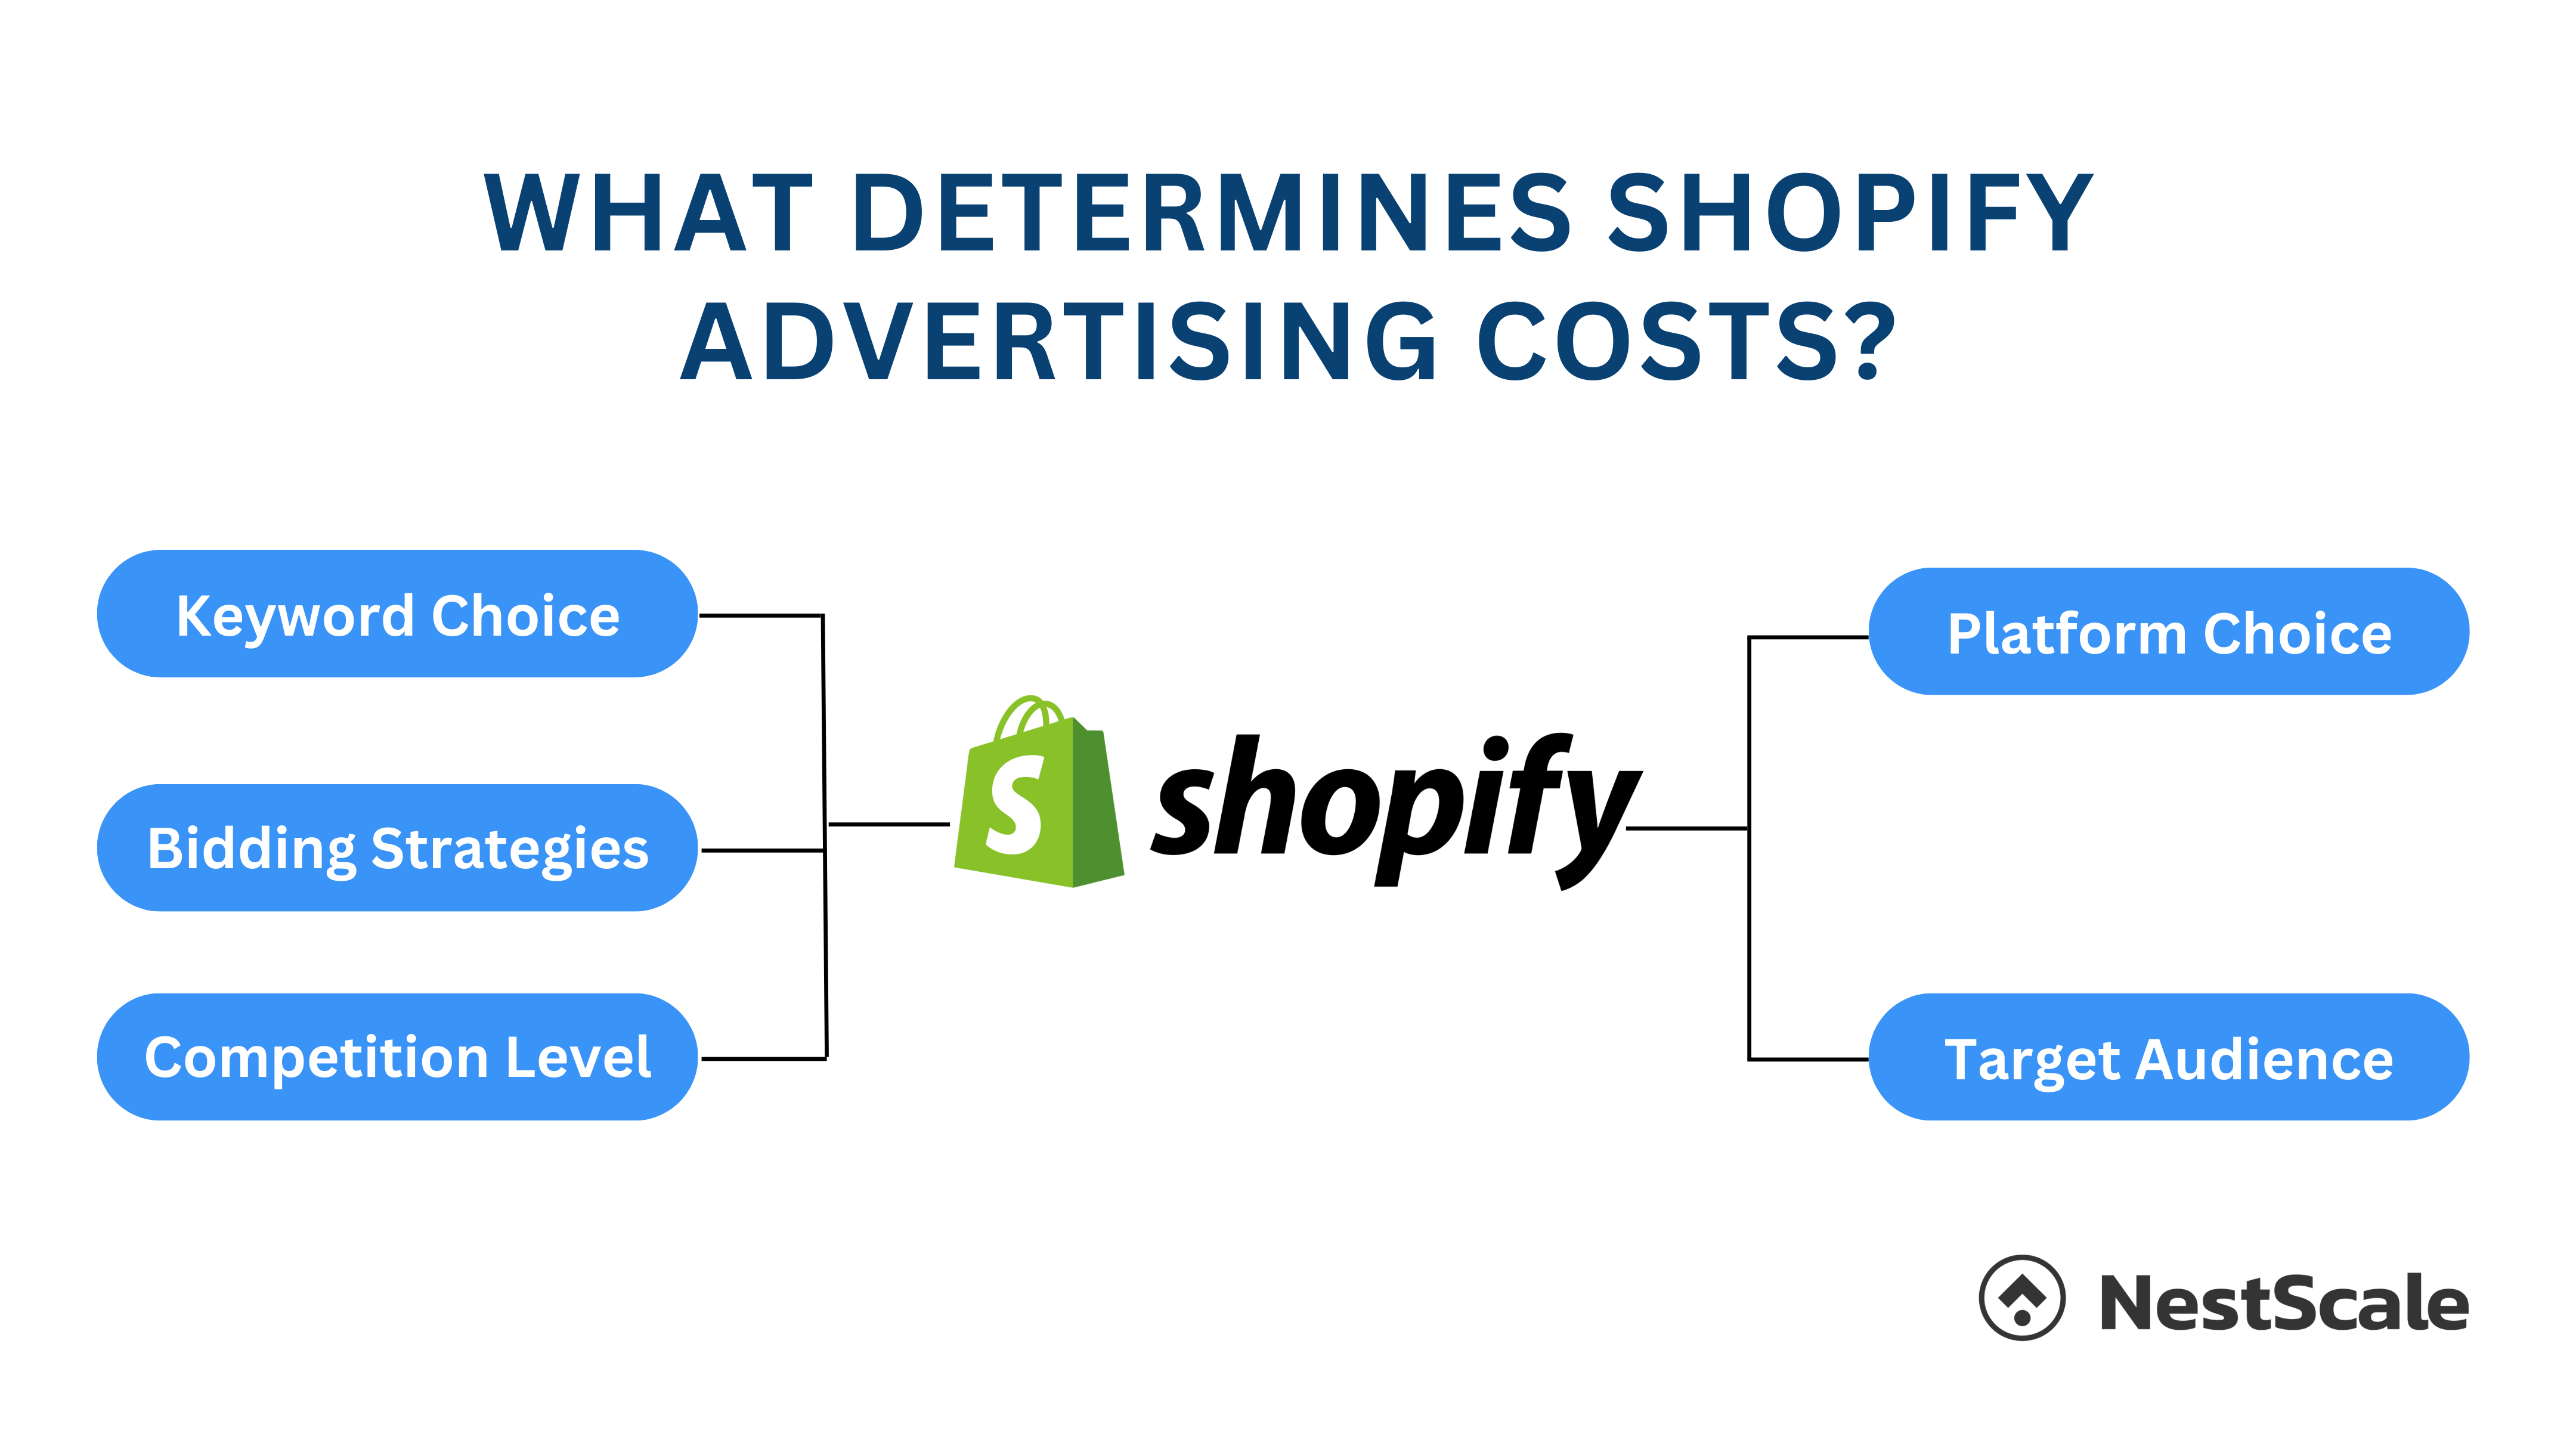 What determines shopify advertising costs?